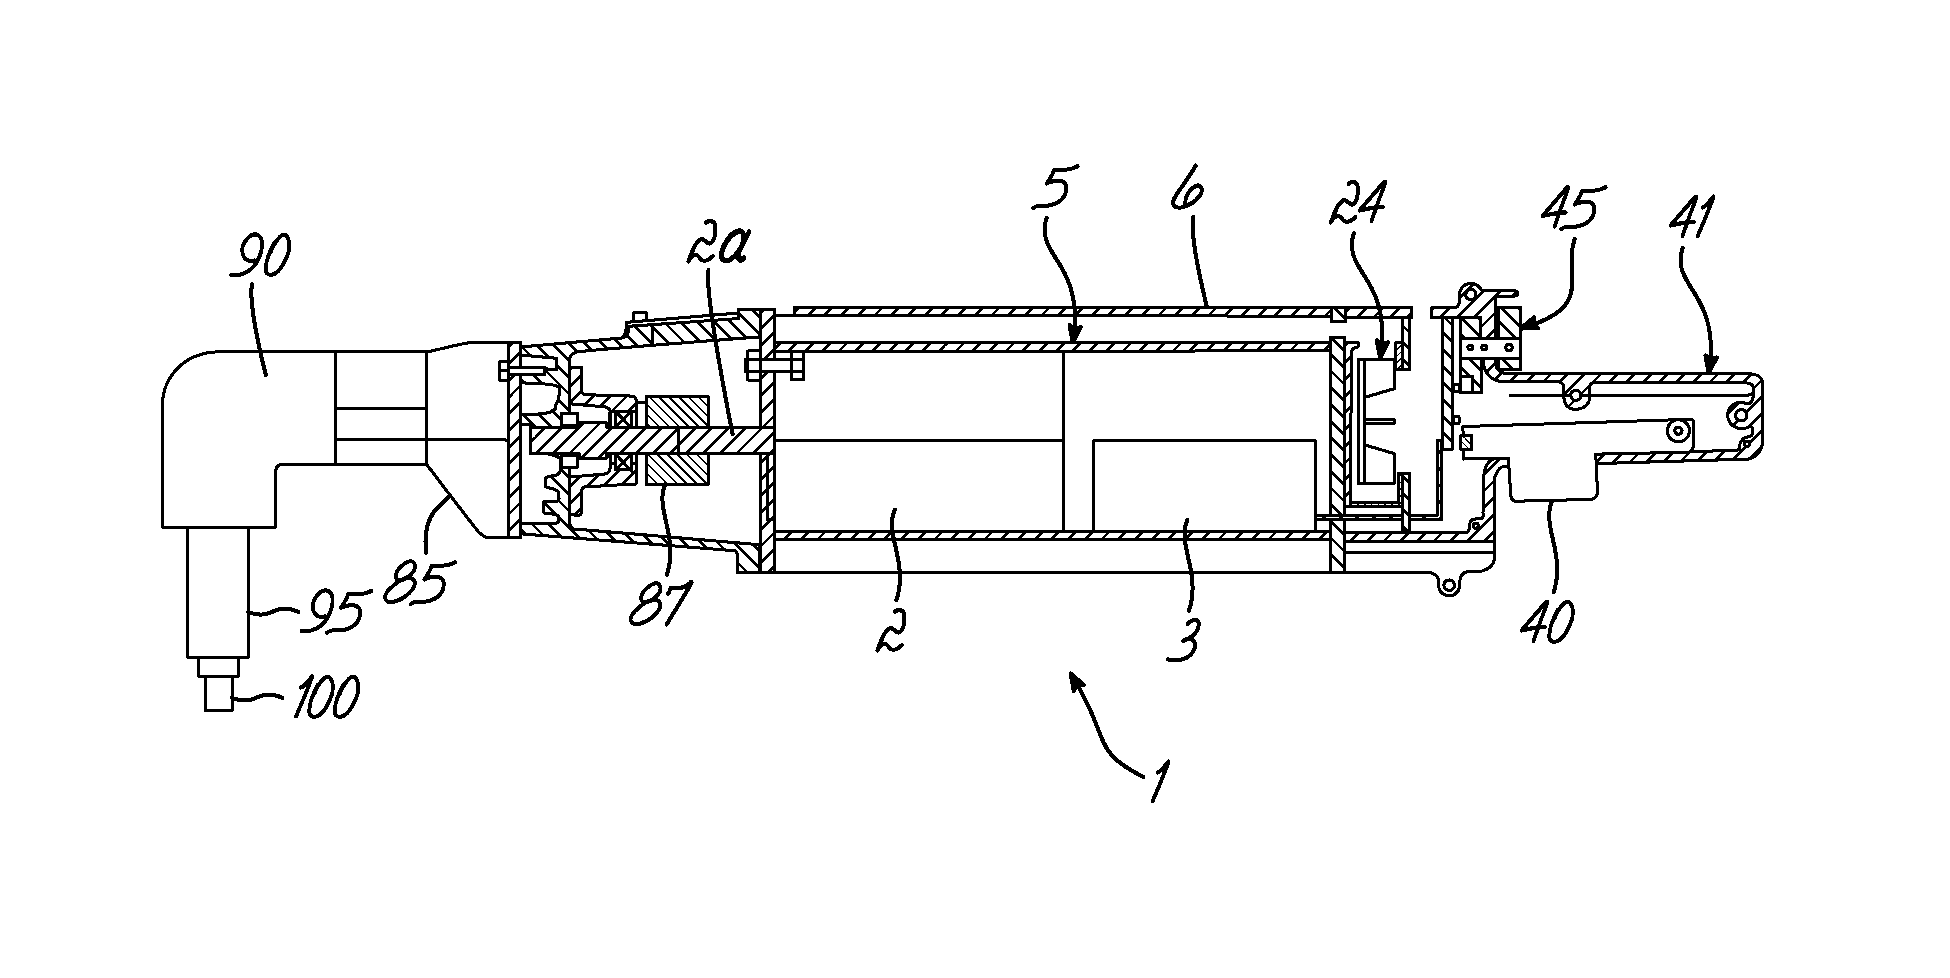 Power transmission tool and system